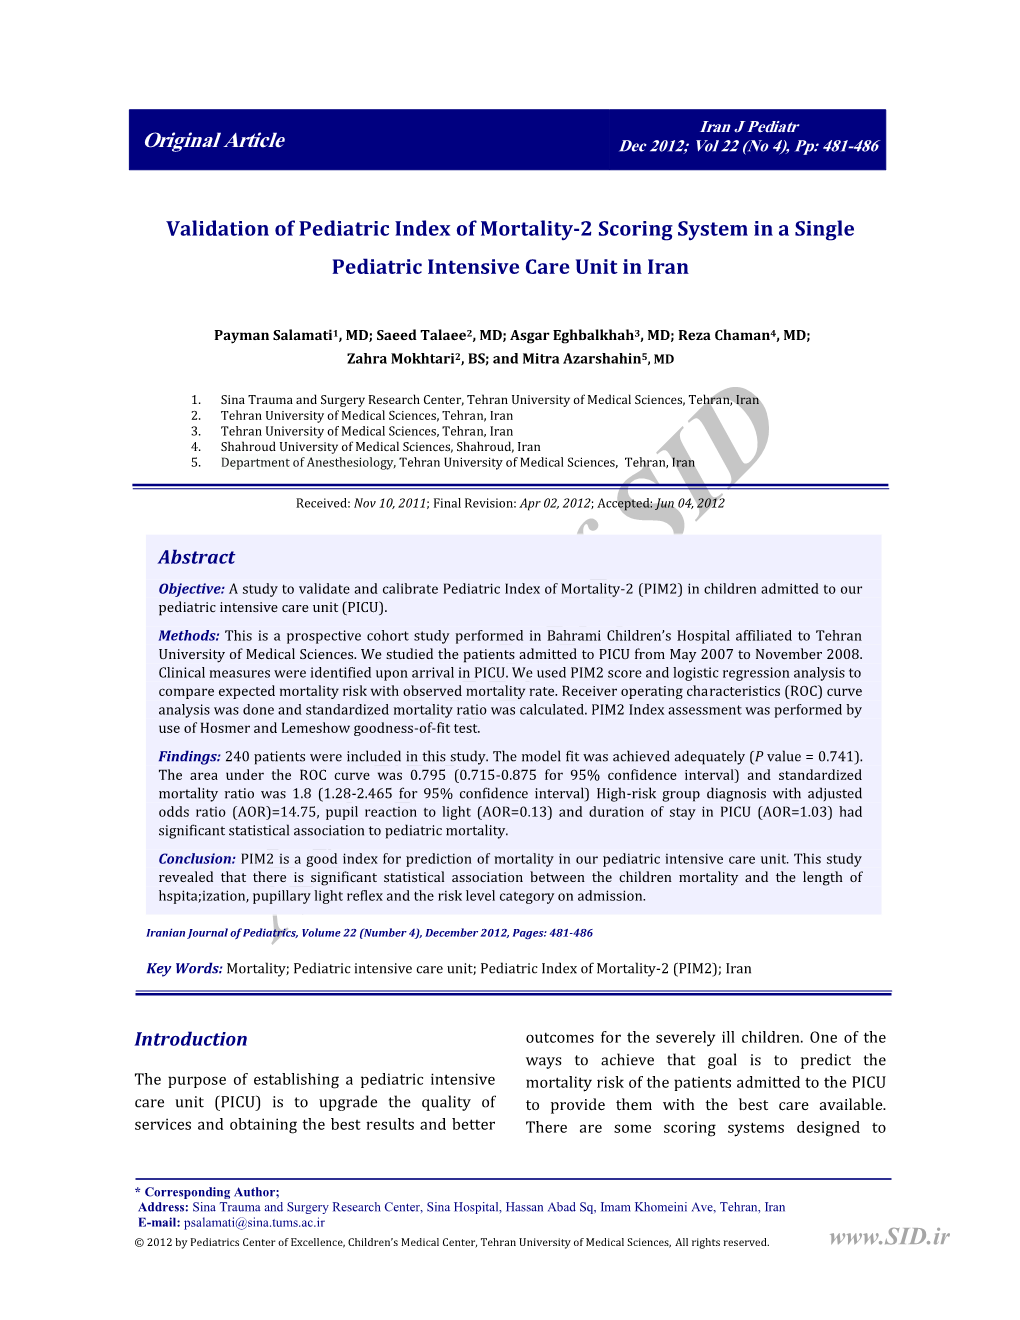 Validation of Pediatric Index of Mortality-2 Scoring System in a Single Pediatric Intensive Care Unit in Iran